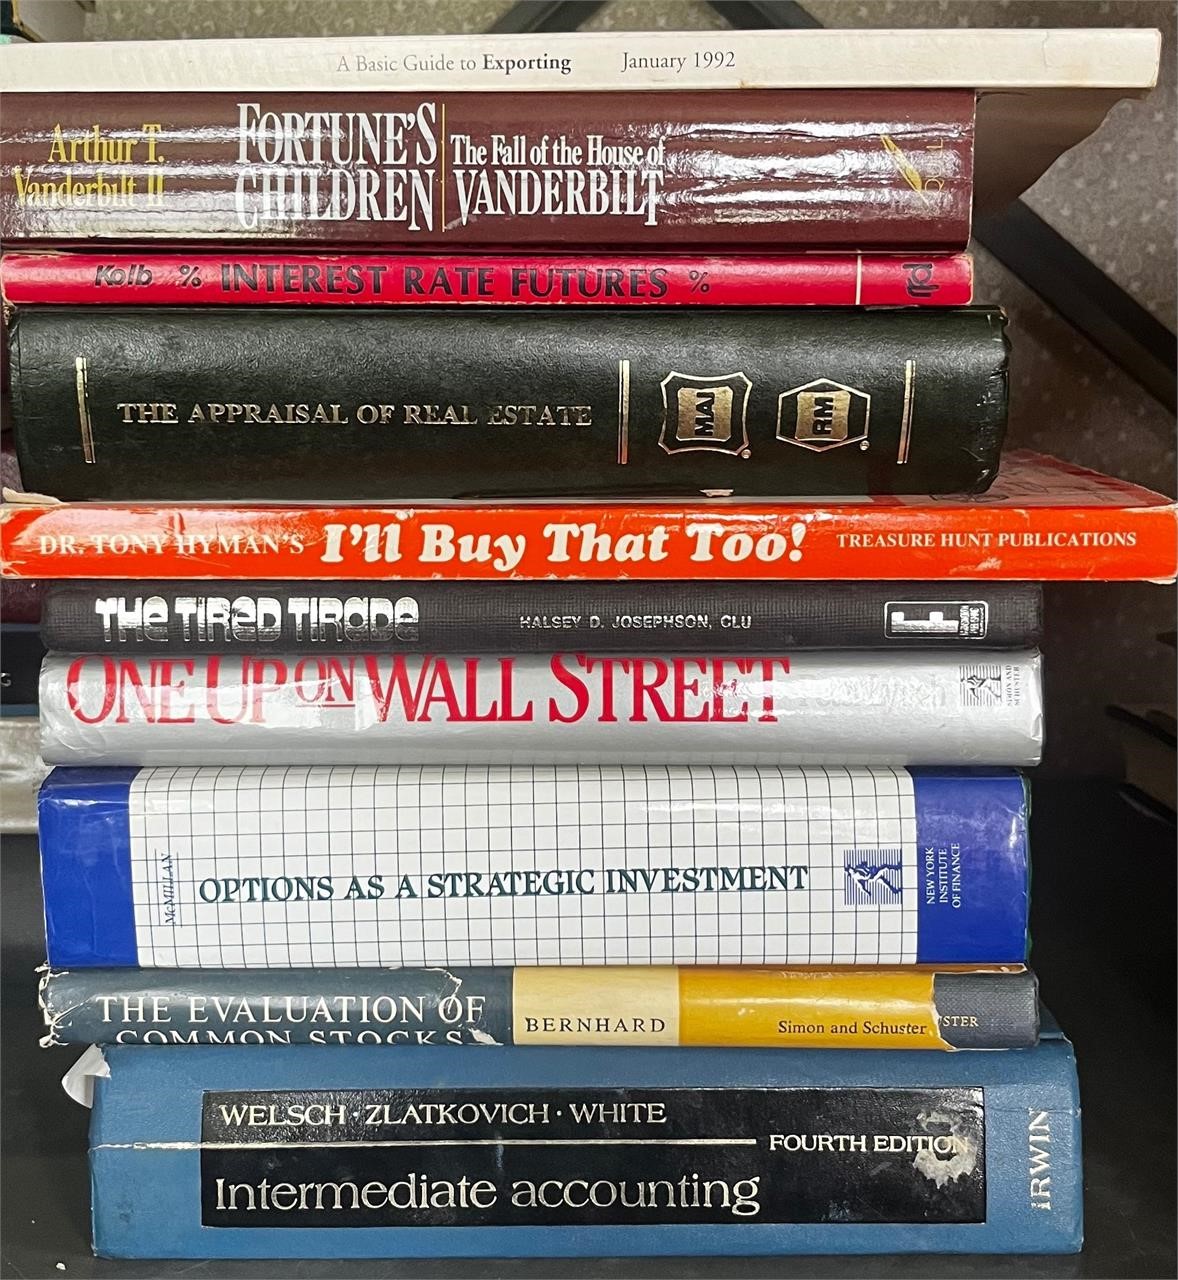 Investment books and other